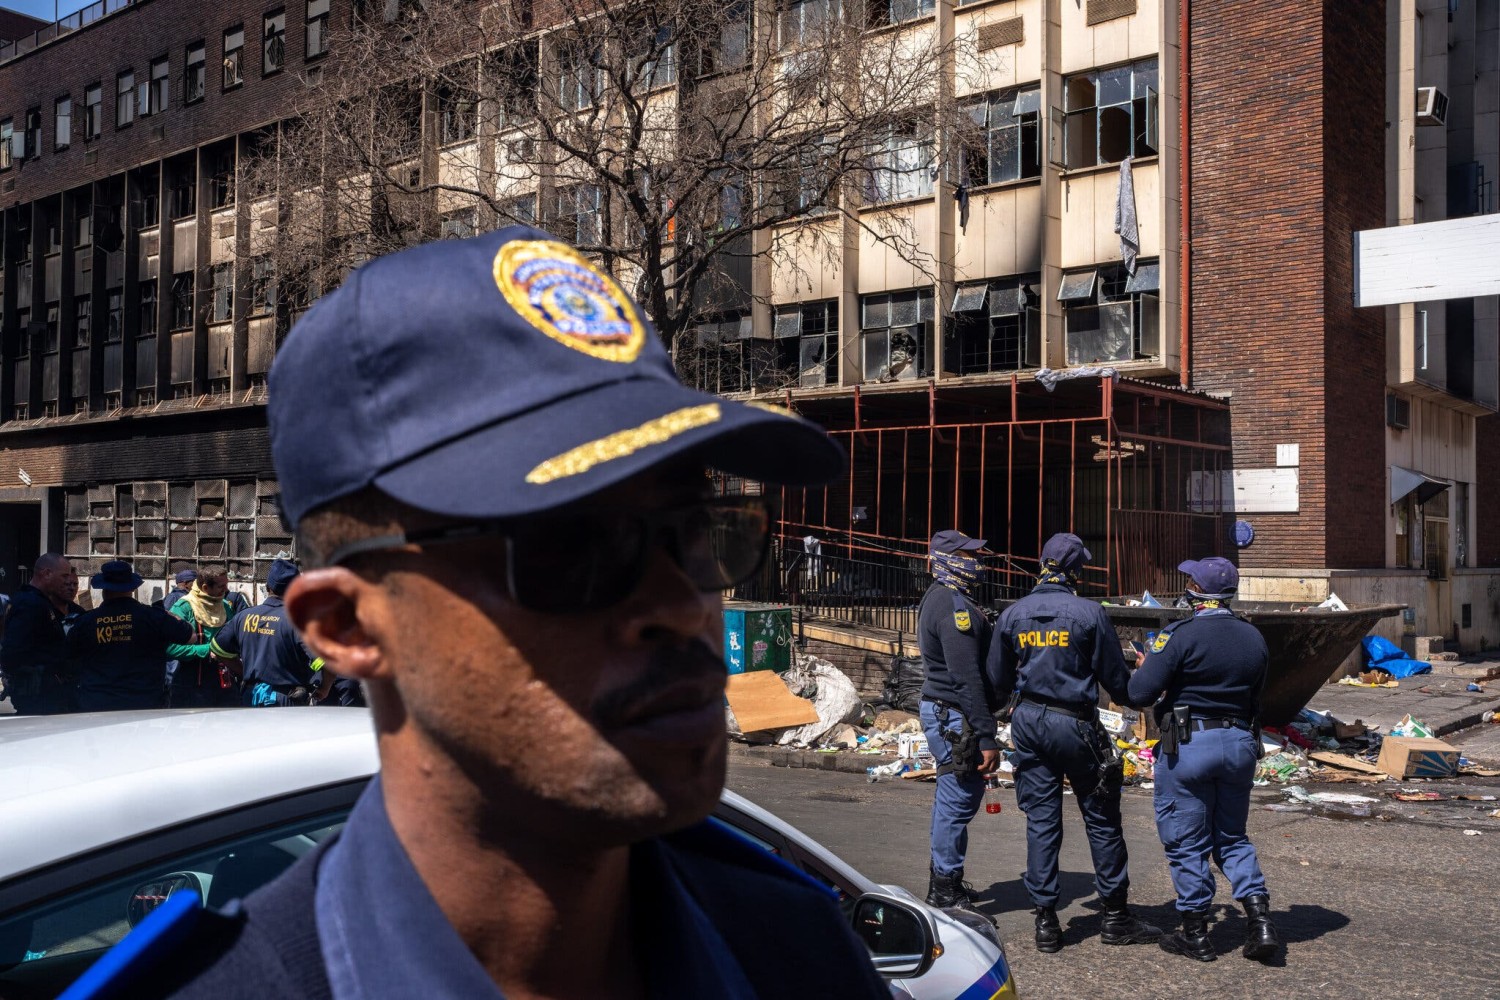 Outside the building in Johannesburg on Thursday. At least 12 children were among the victims.Credit...Joao Silva/The New York Times